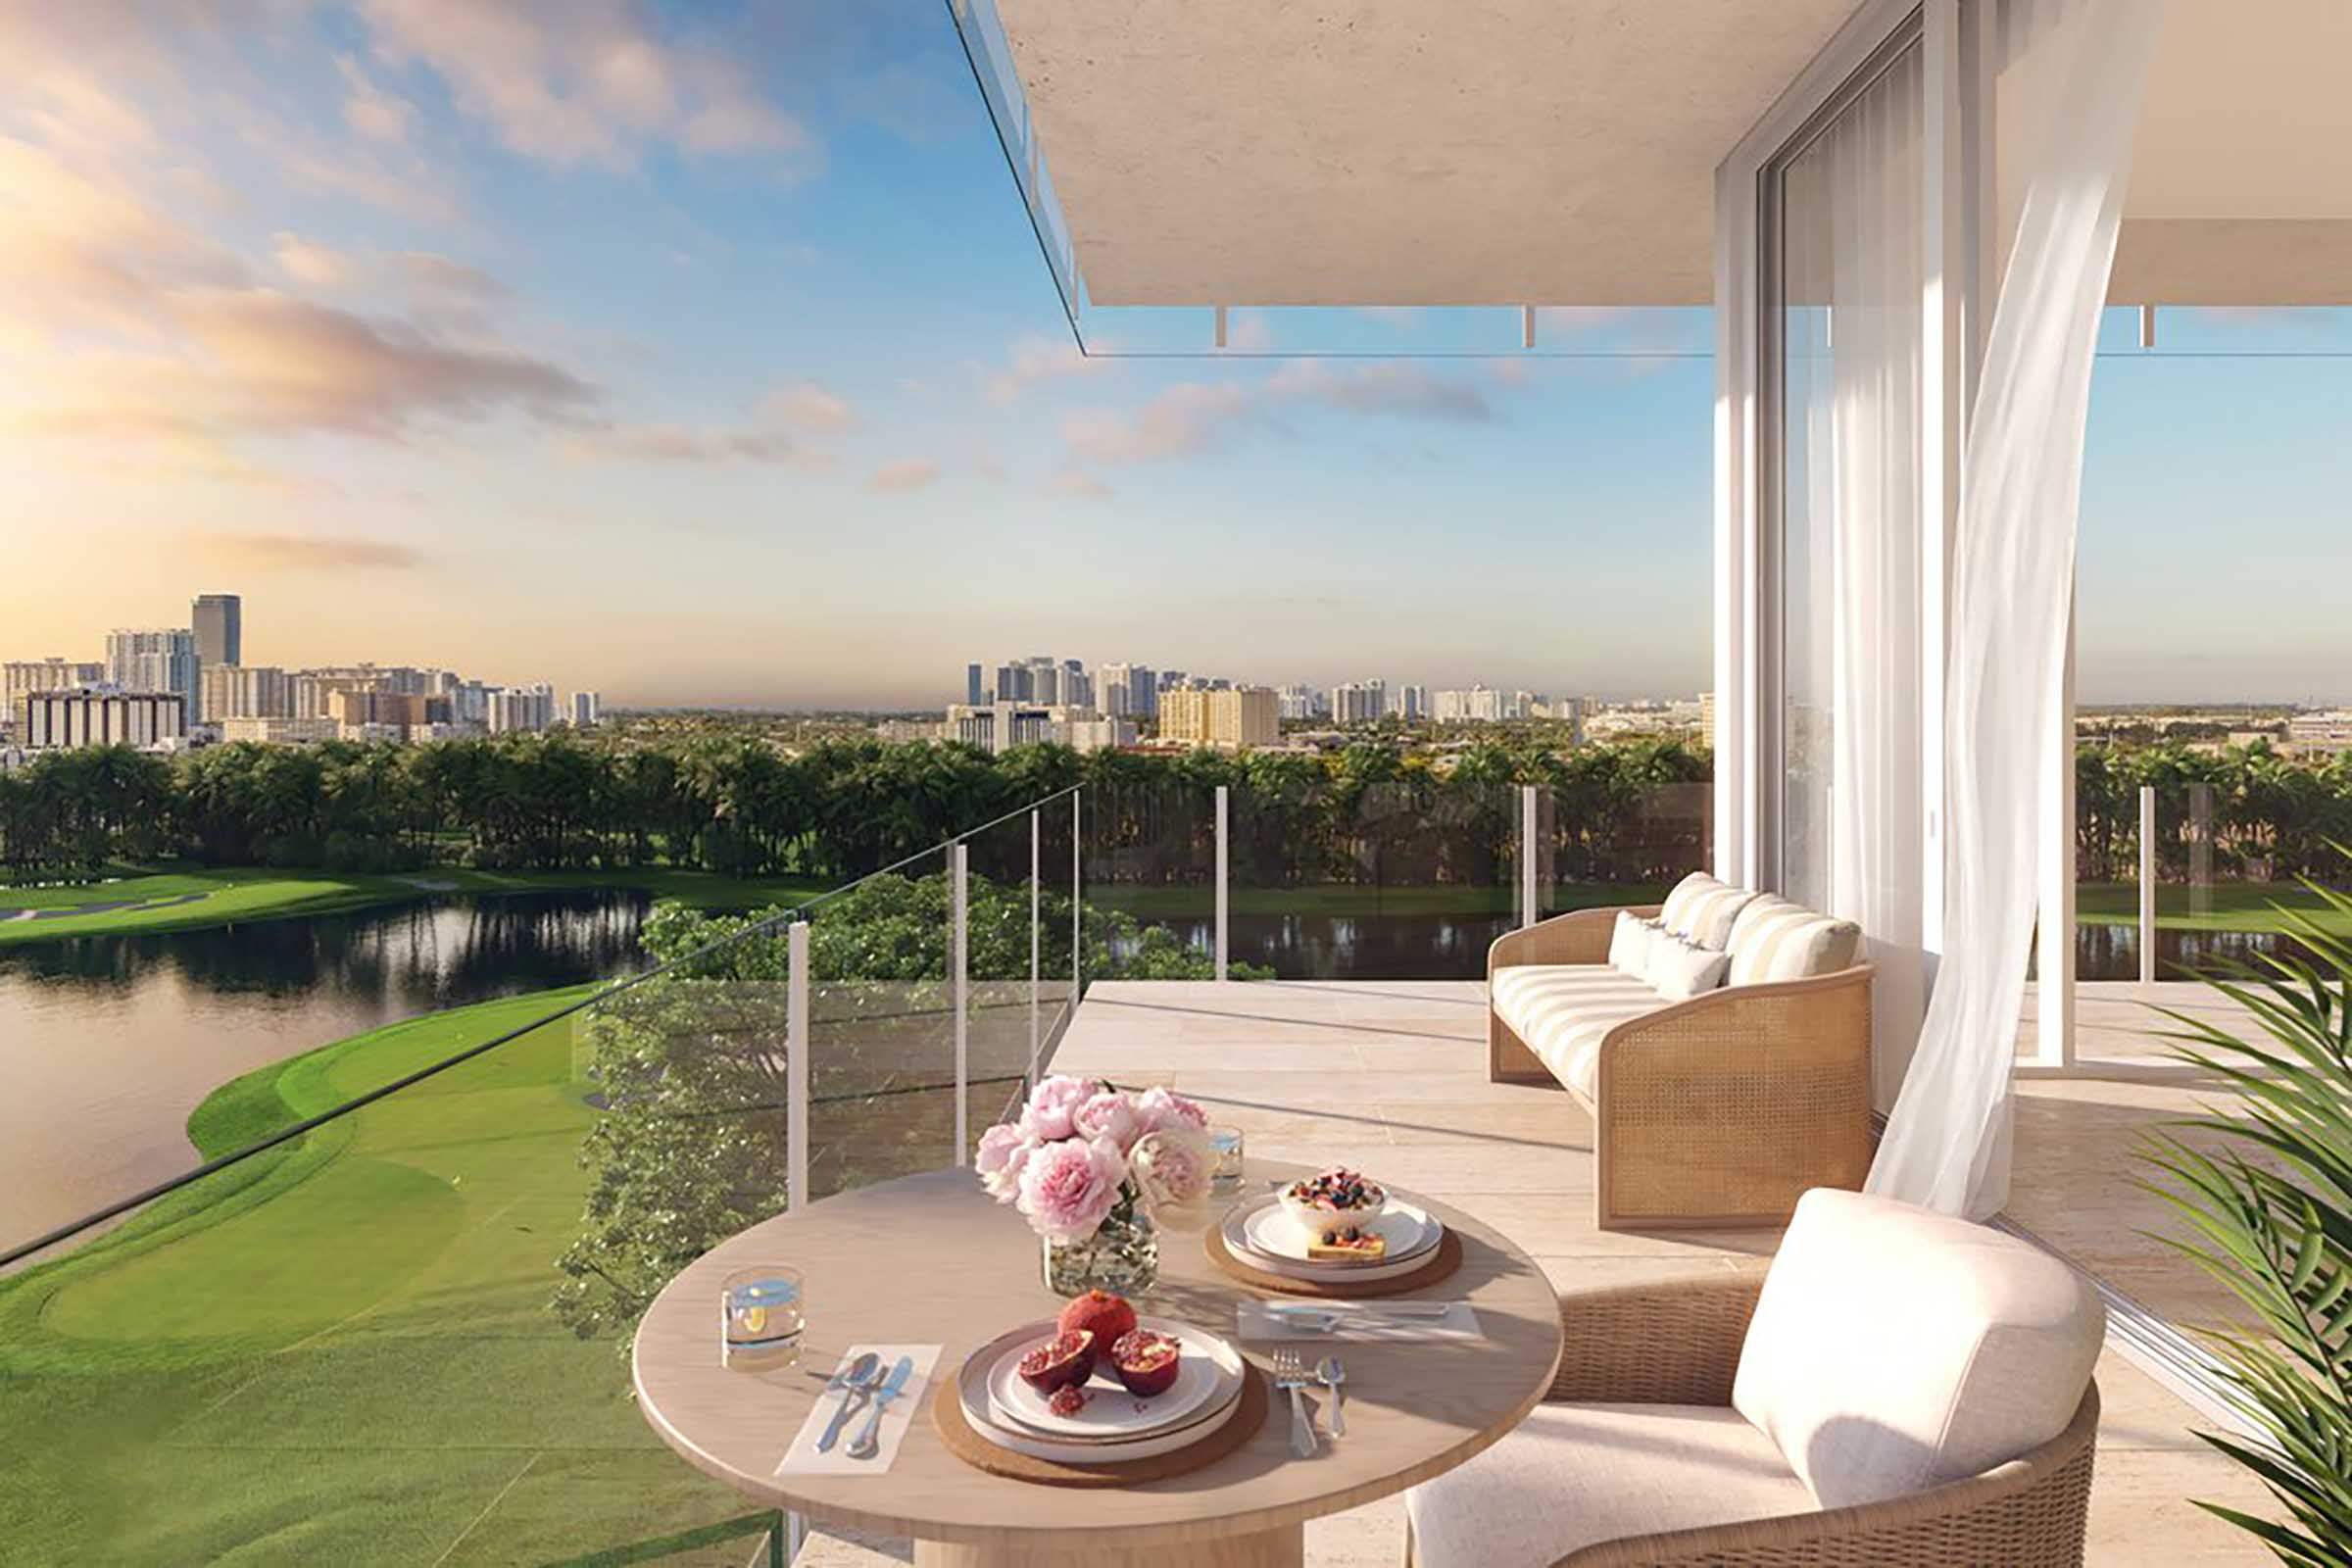 Introducing Shell Bay, The First New Miami Golf Course Community In 25 Years